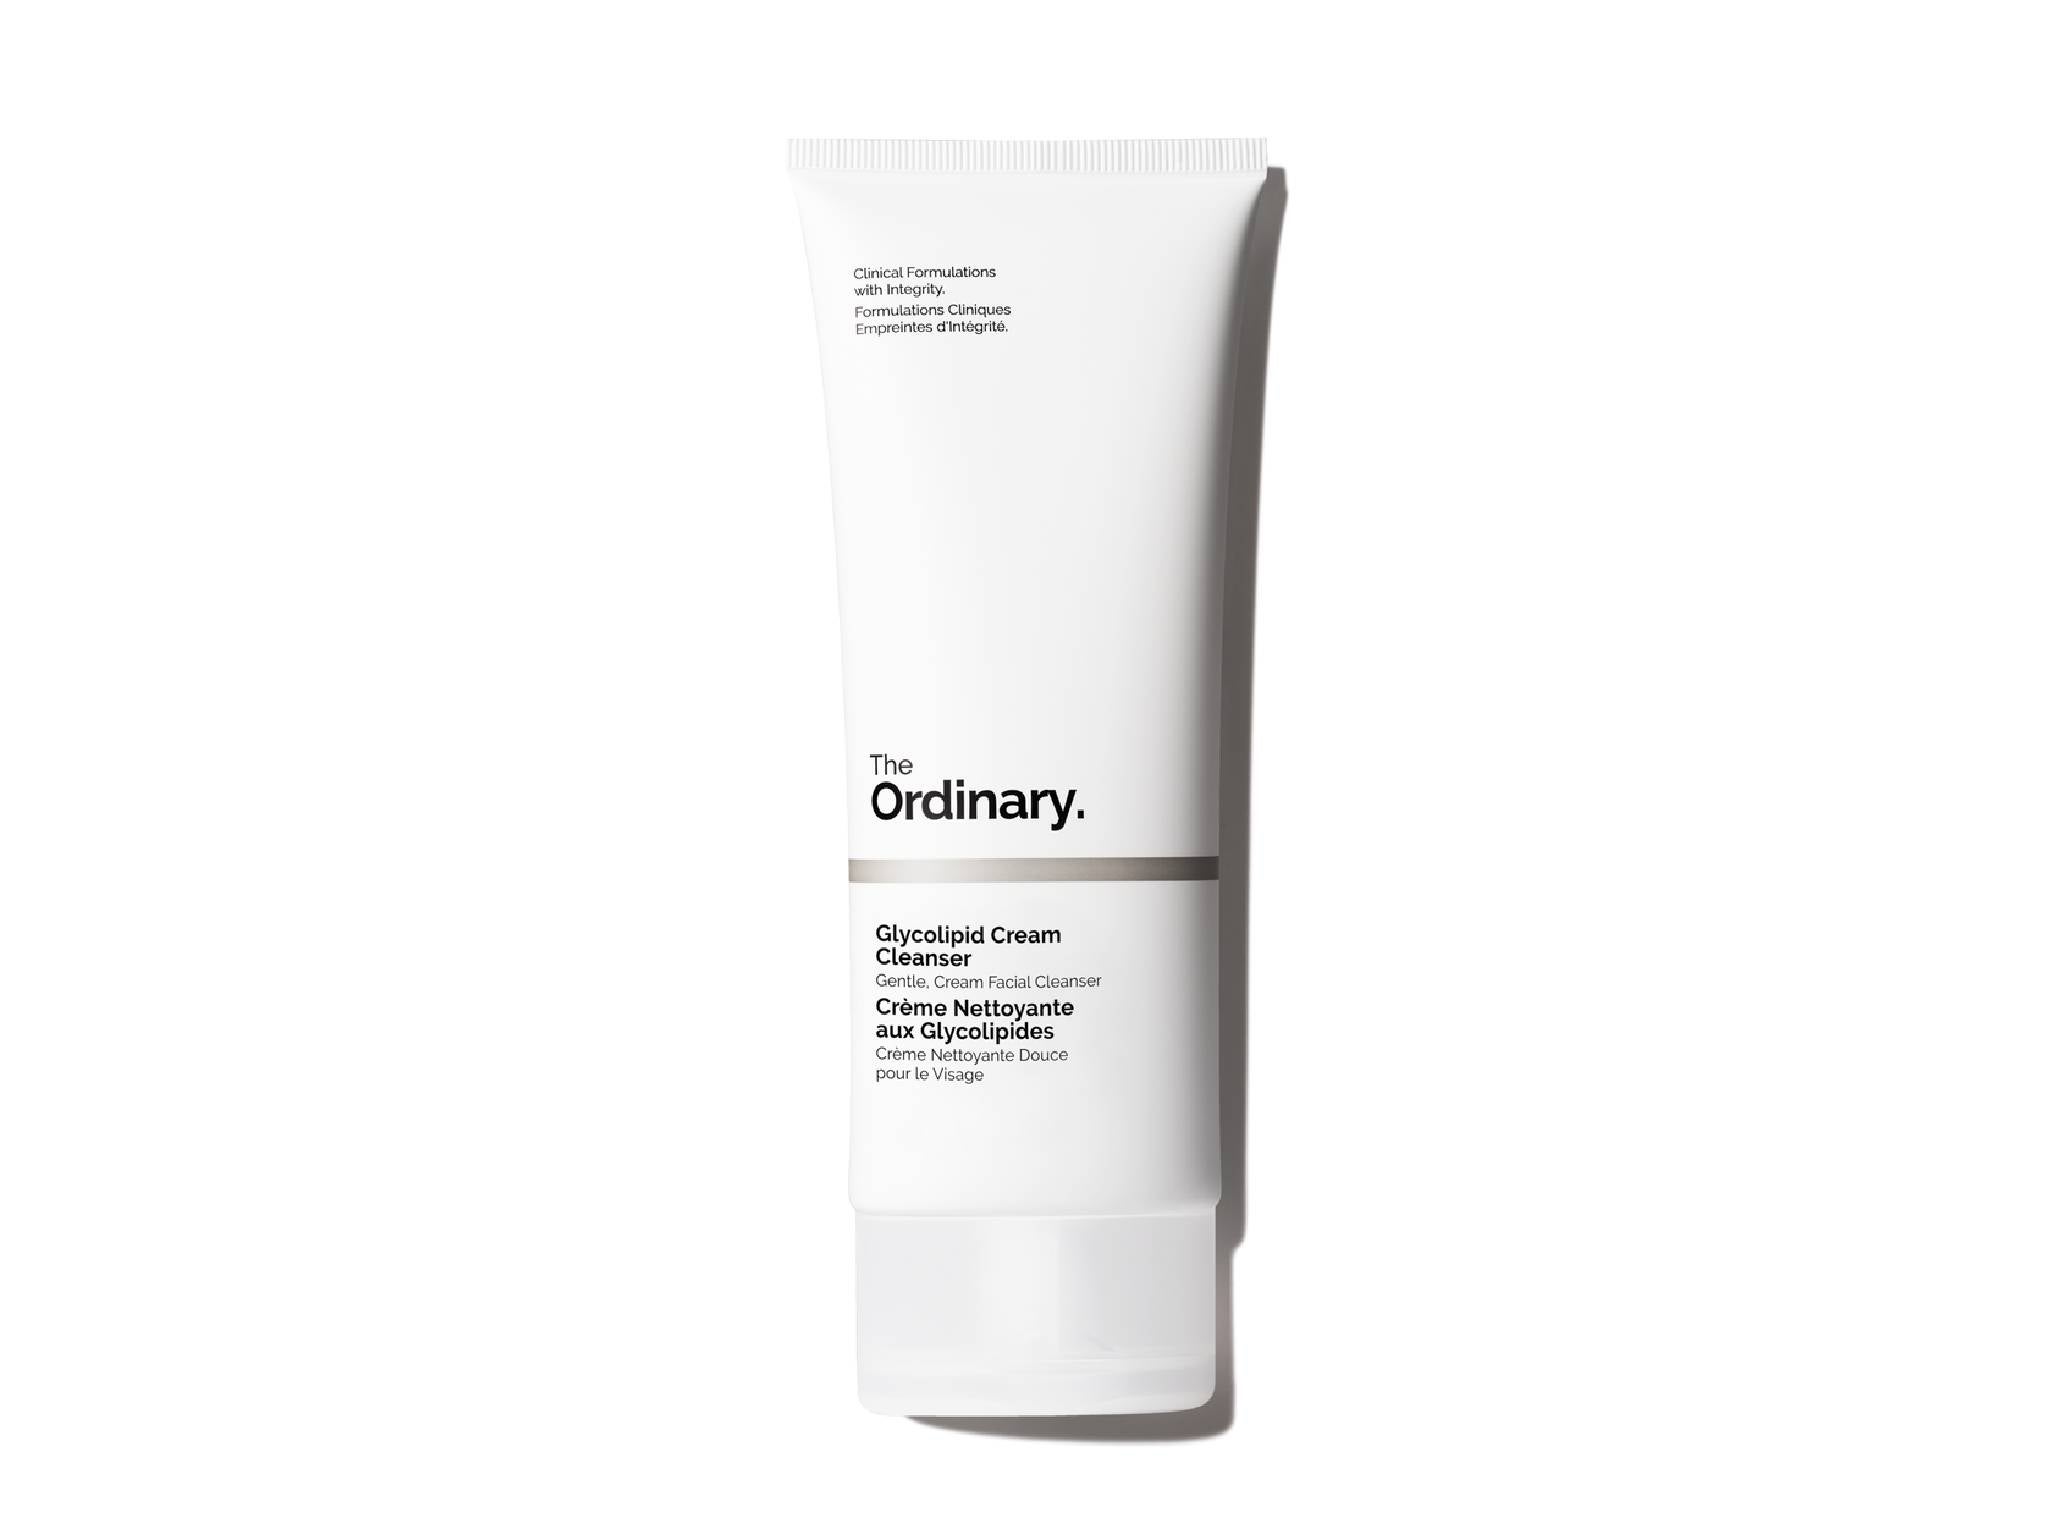 The Ordinary glycolipid cream cleanser